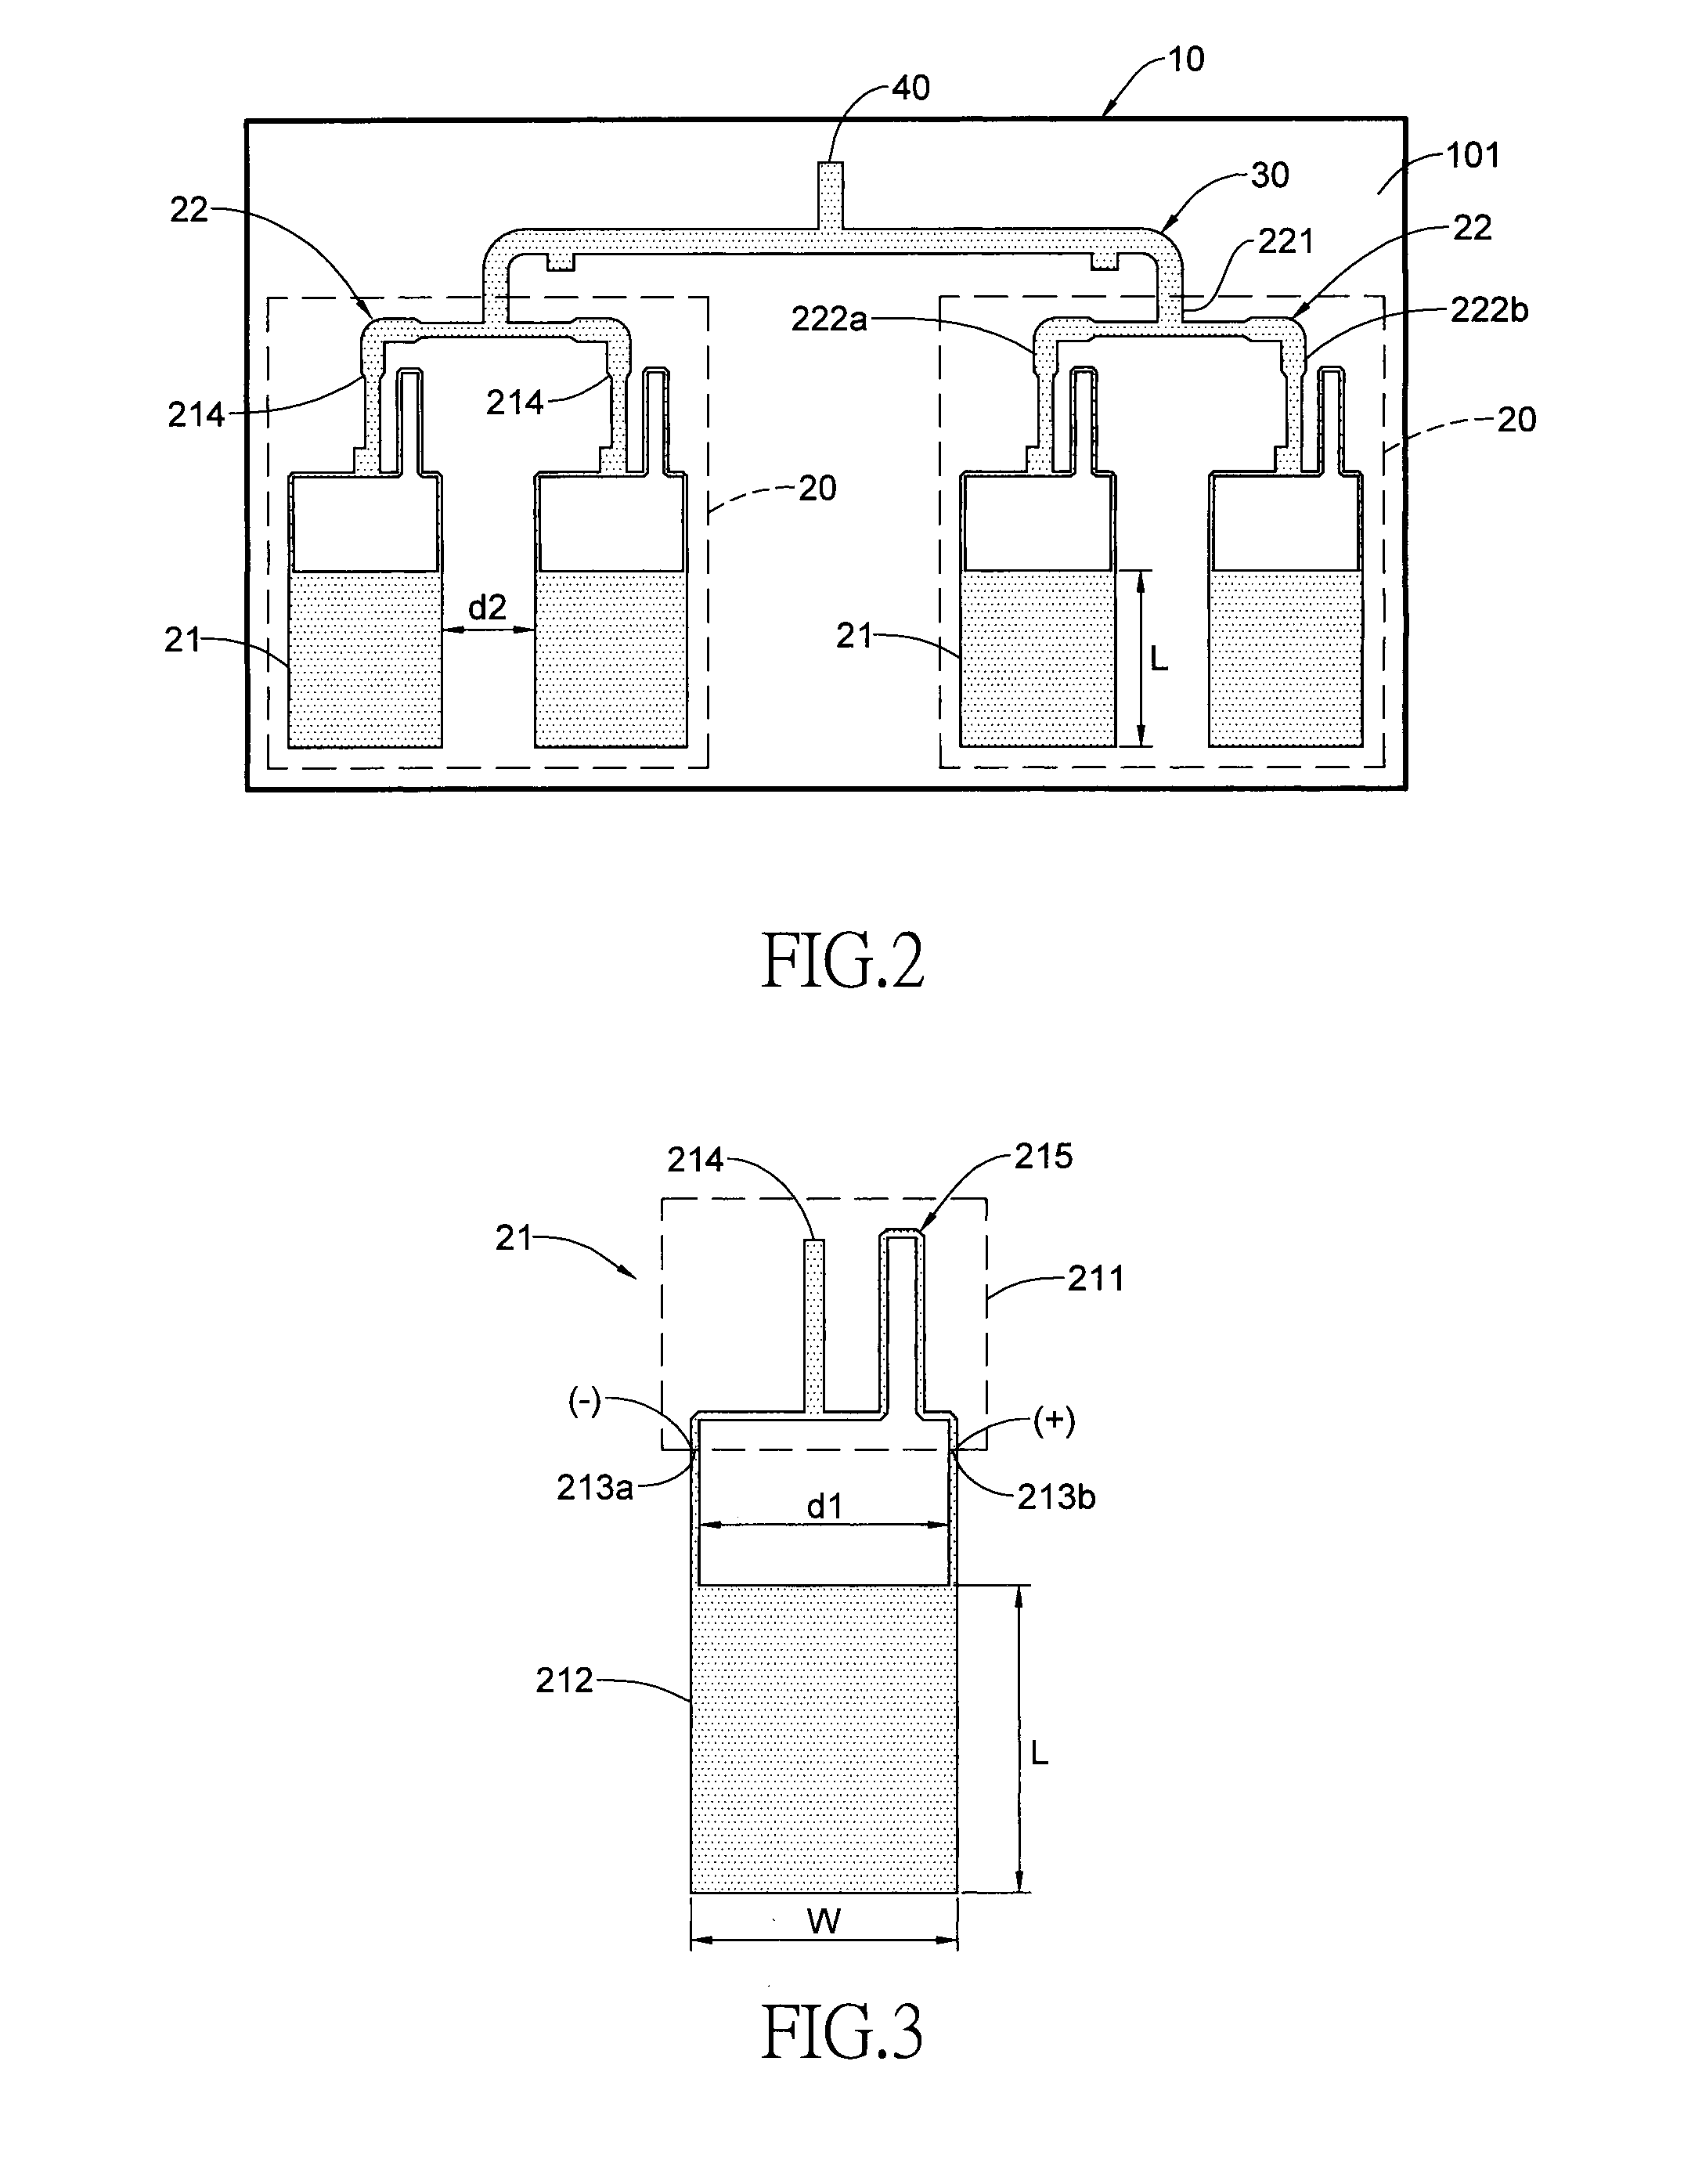 Two-dimensional antenna array, one-dimensional antenna array and single differential feeding antenna